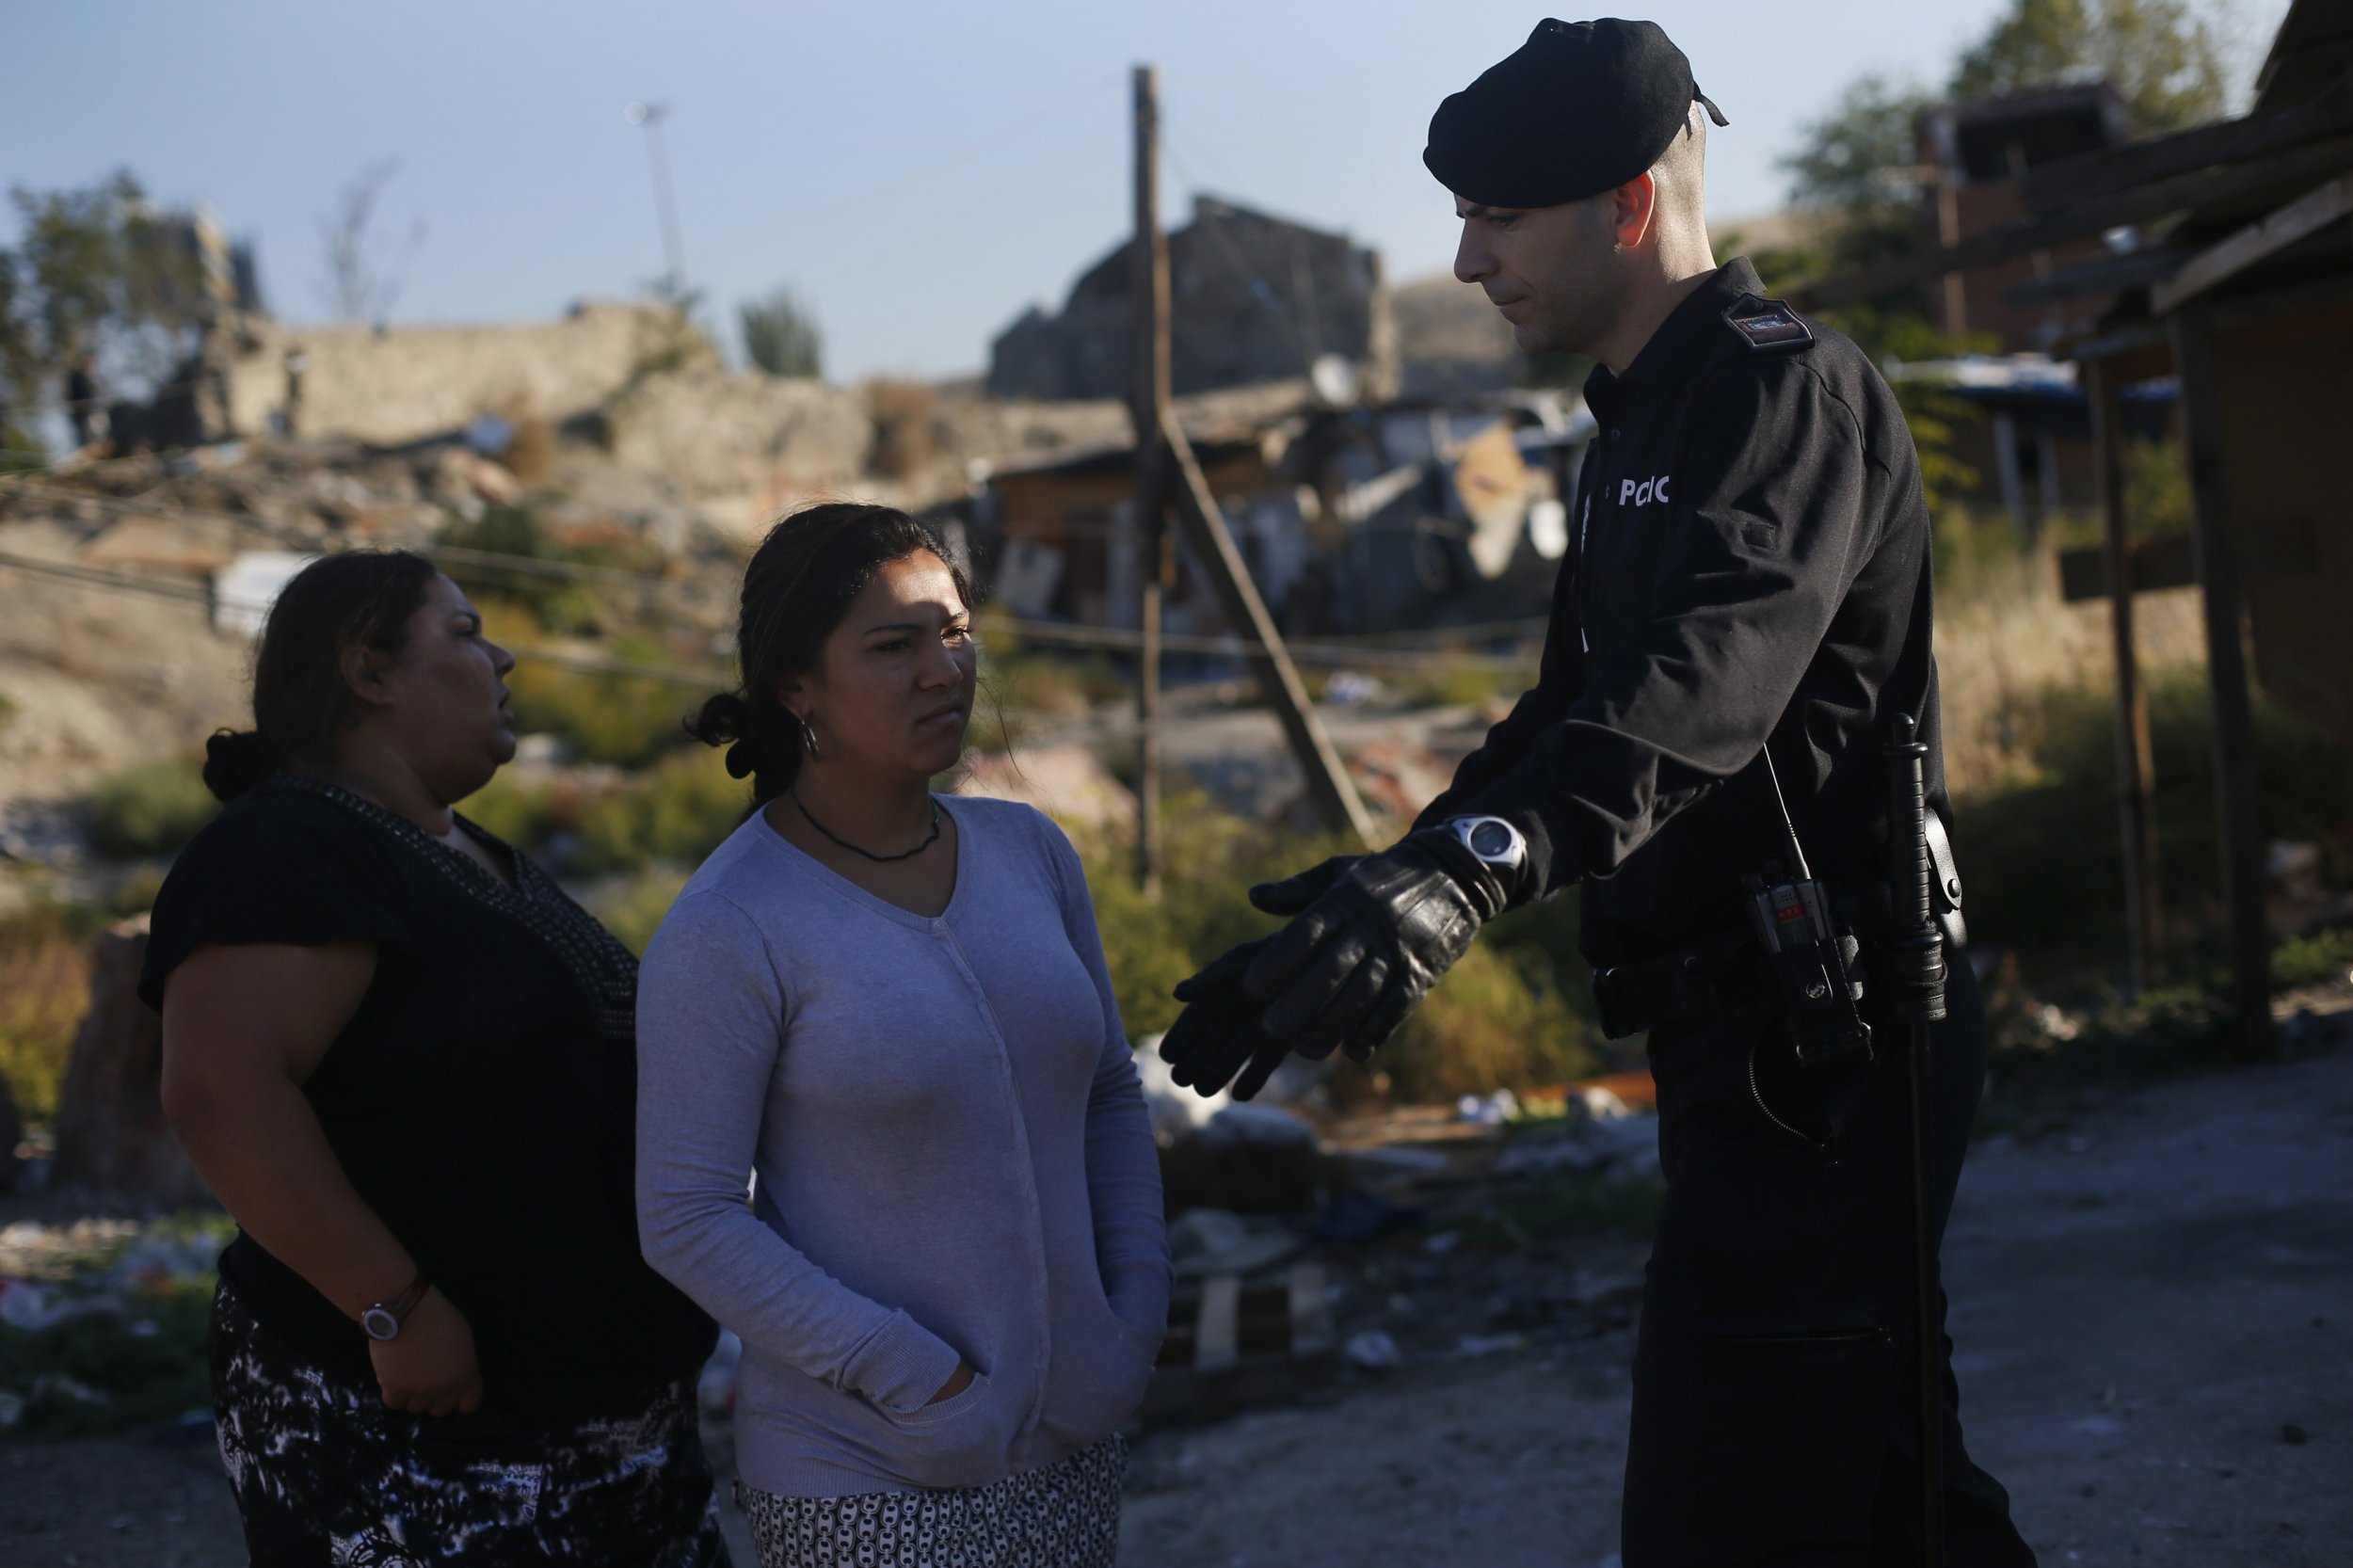 A woman is blocked from entering her former home, as Spanish police proceeded to demolish it, during an operation in Madrids El Gallinero slum.